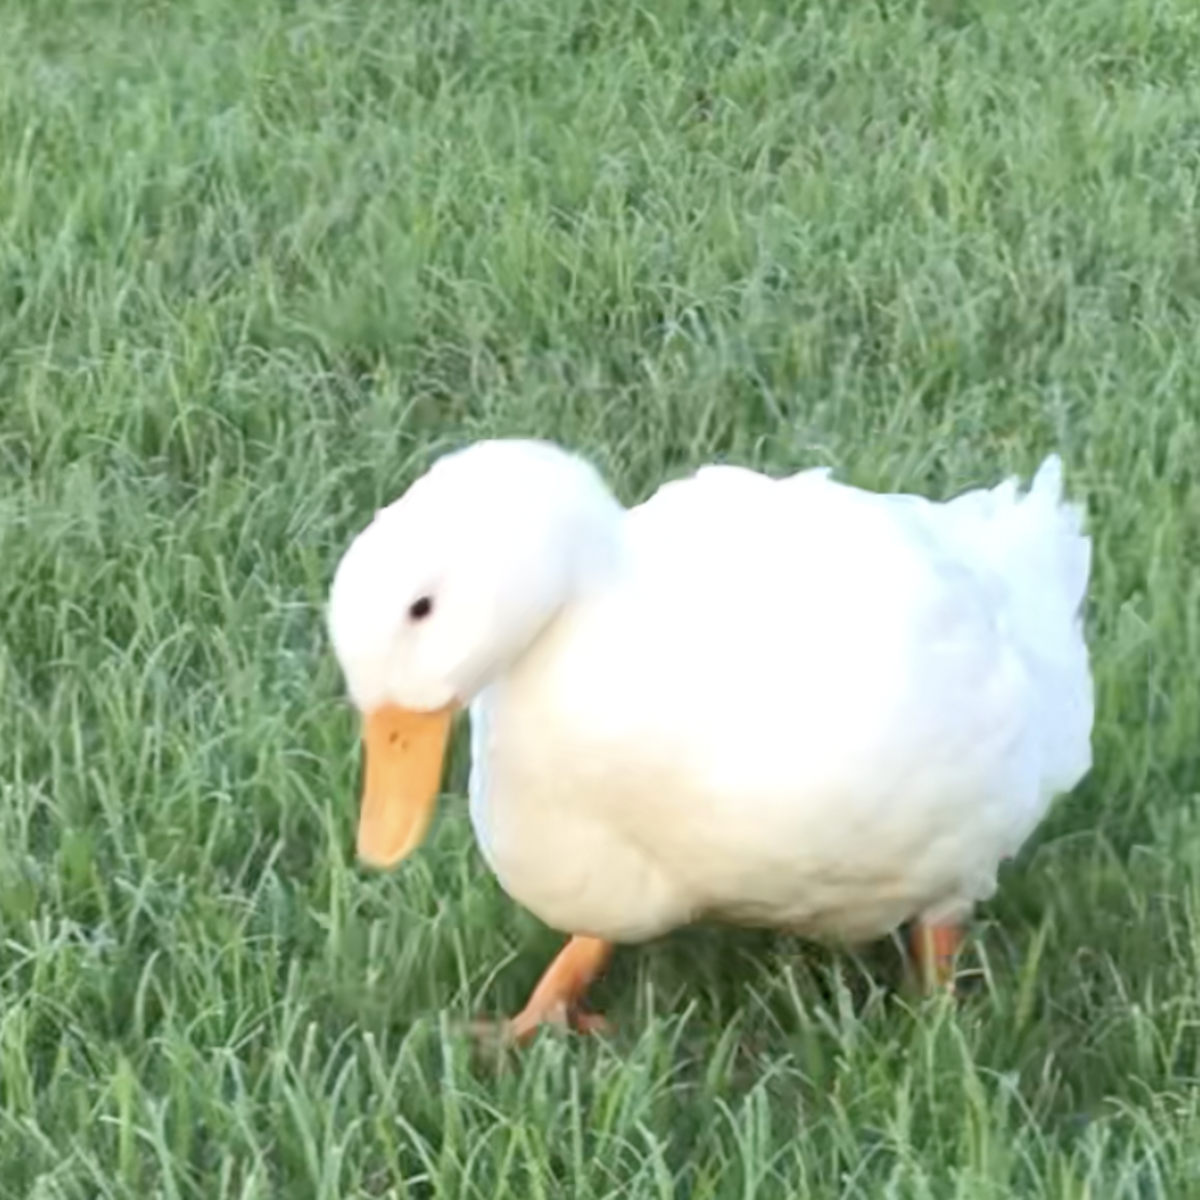 Q&A: Why Does My Duck Have a Swollen Chest on One Side?